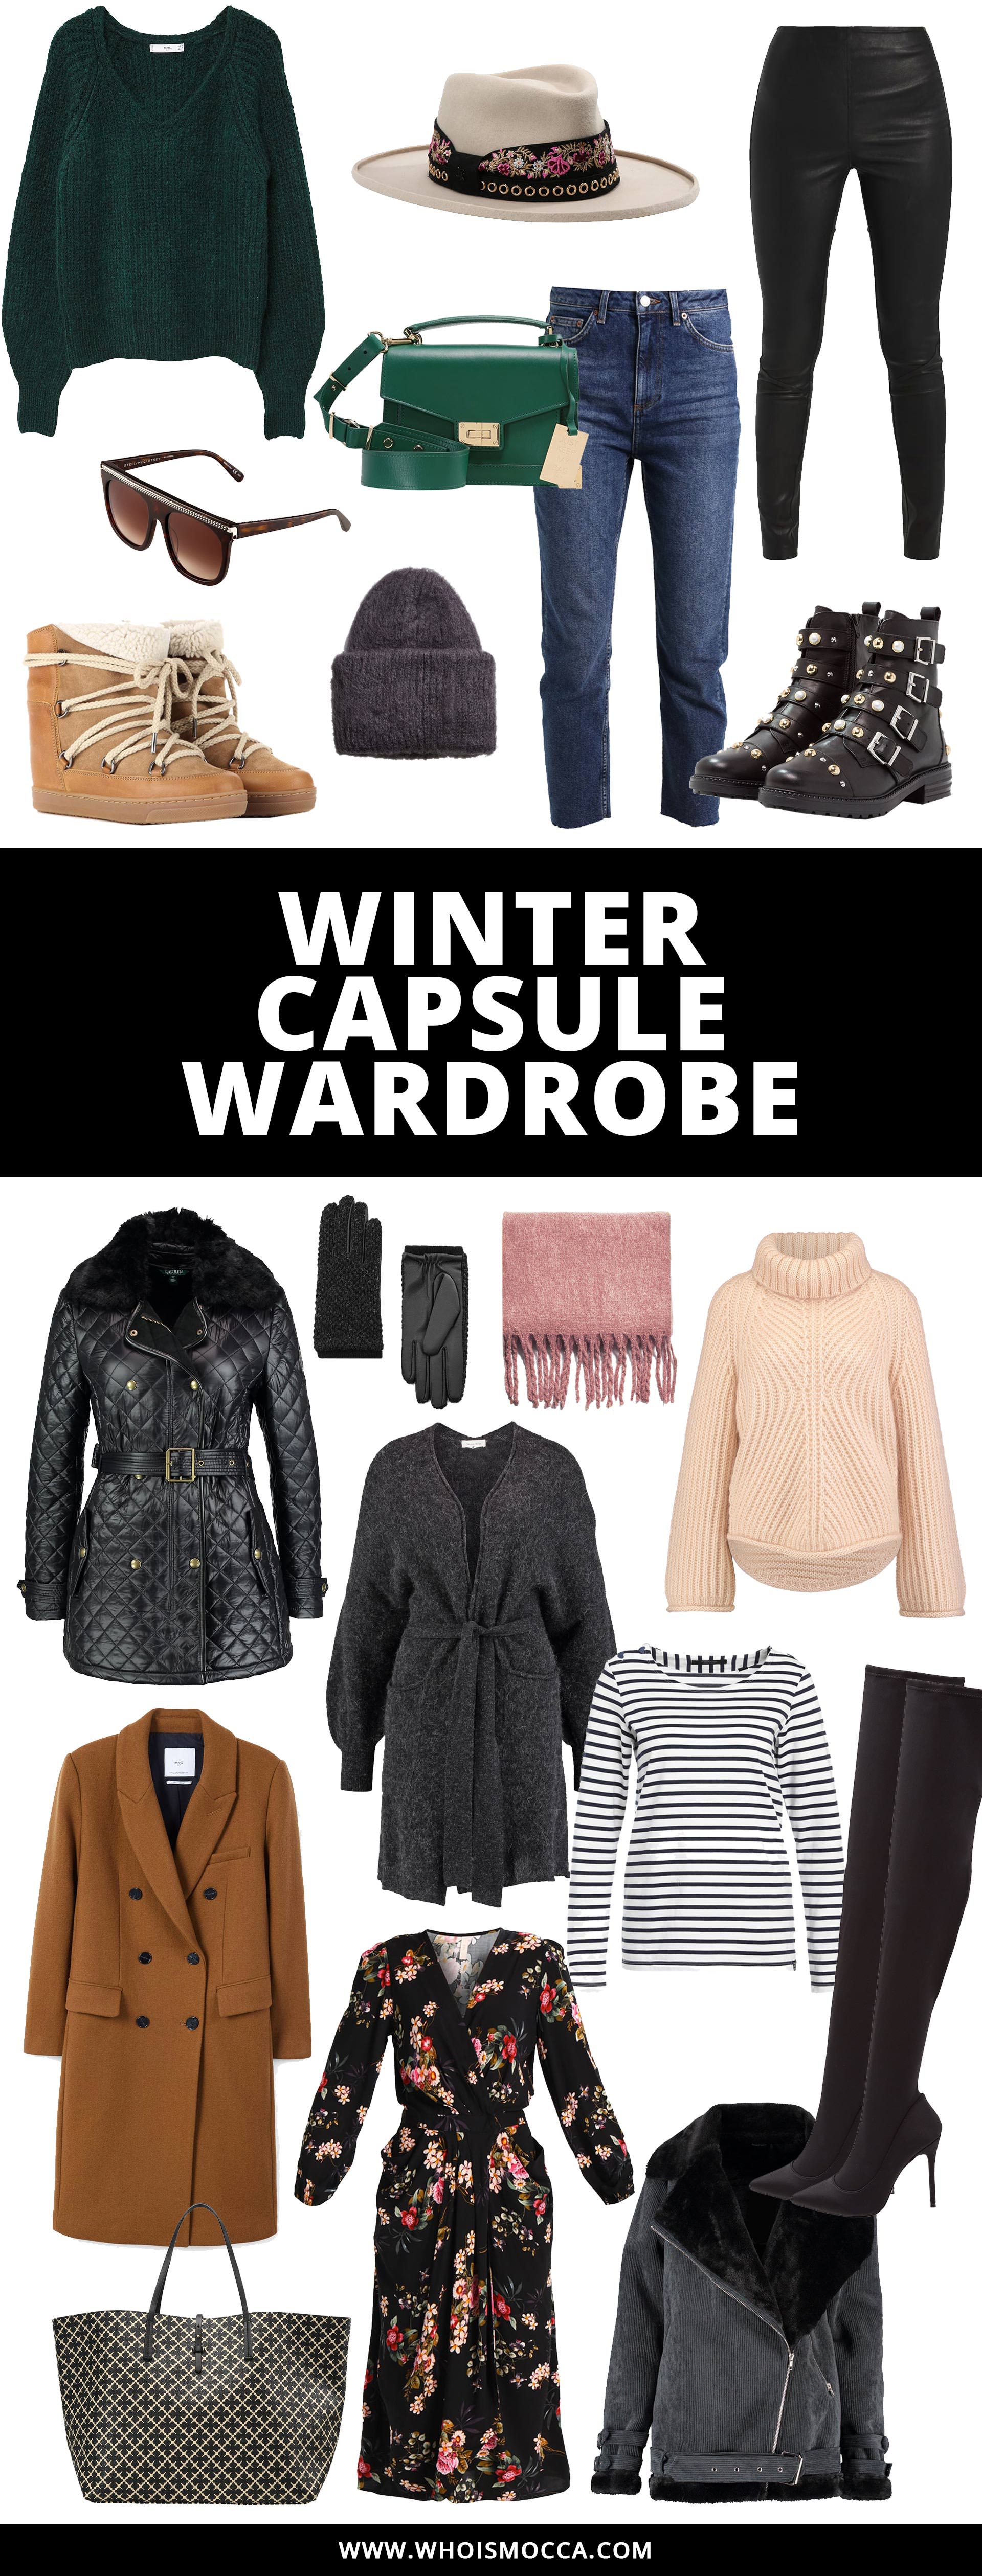 Winter Capsule Wardrobe, Winter Outfit Ideen, Winter Must haves, Fashion Blog, Modeblog, Style Blog, www.whoismocca.com